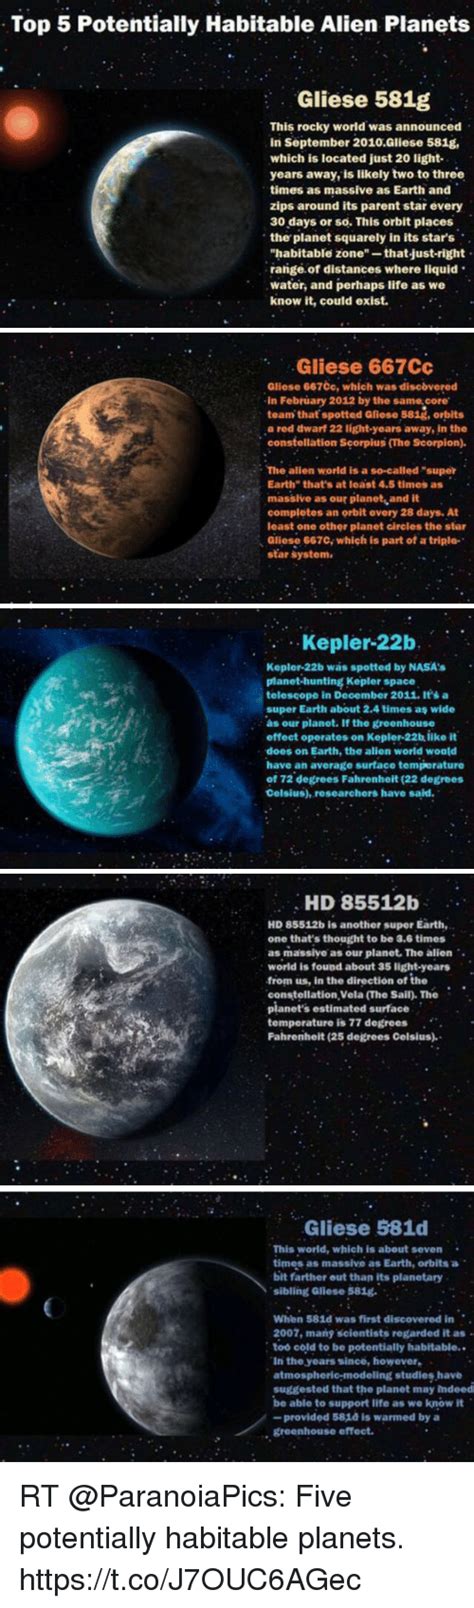 Top 5 Potentially Habitable Alien Planets Gliese 581g This